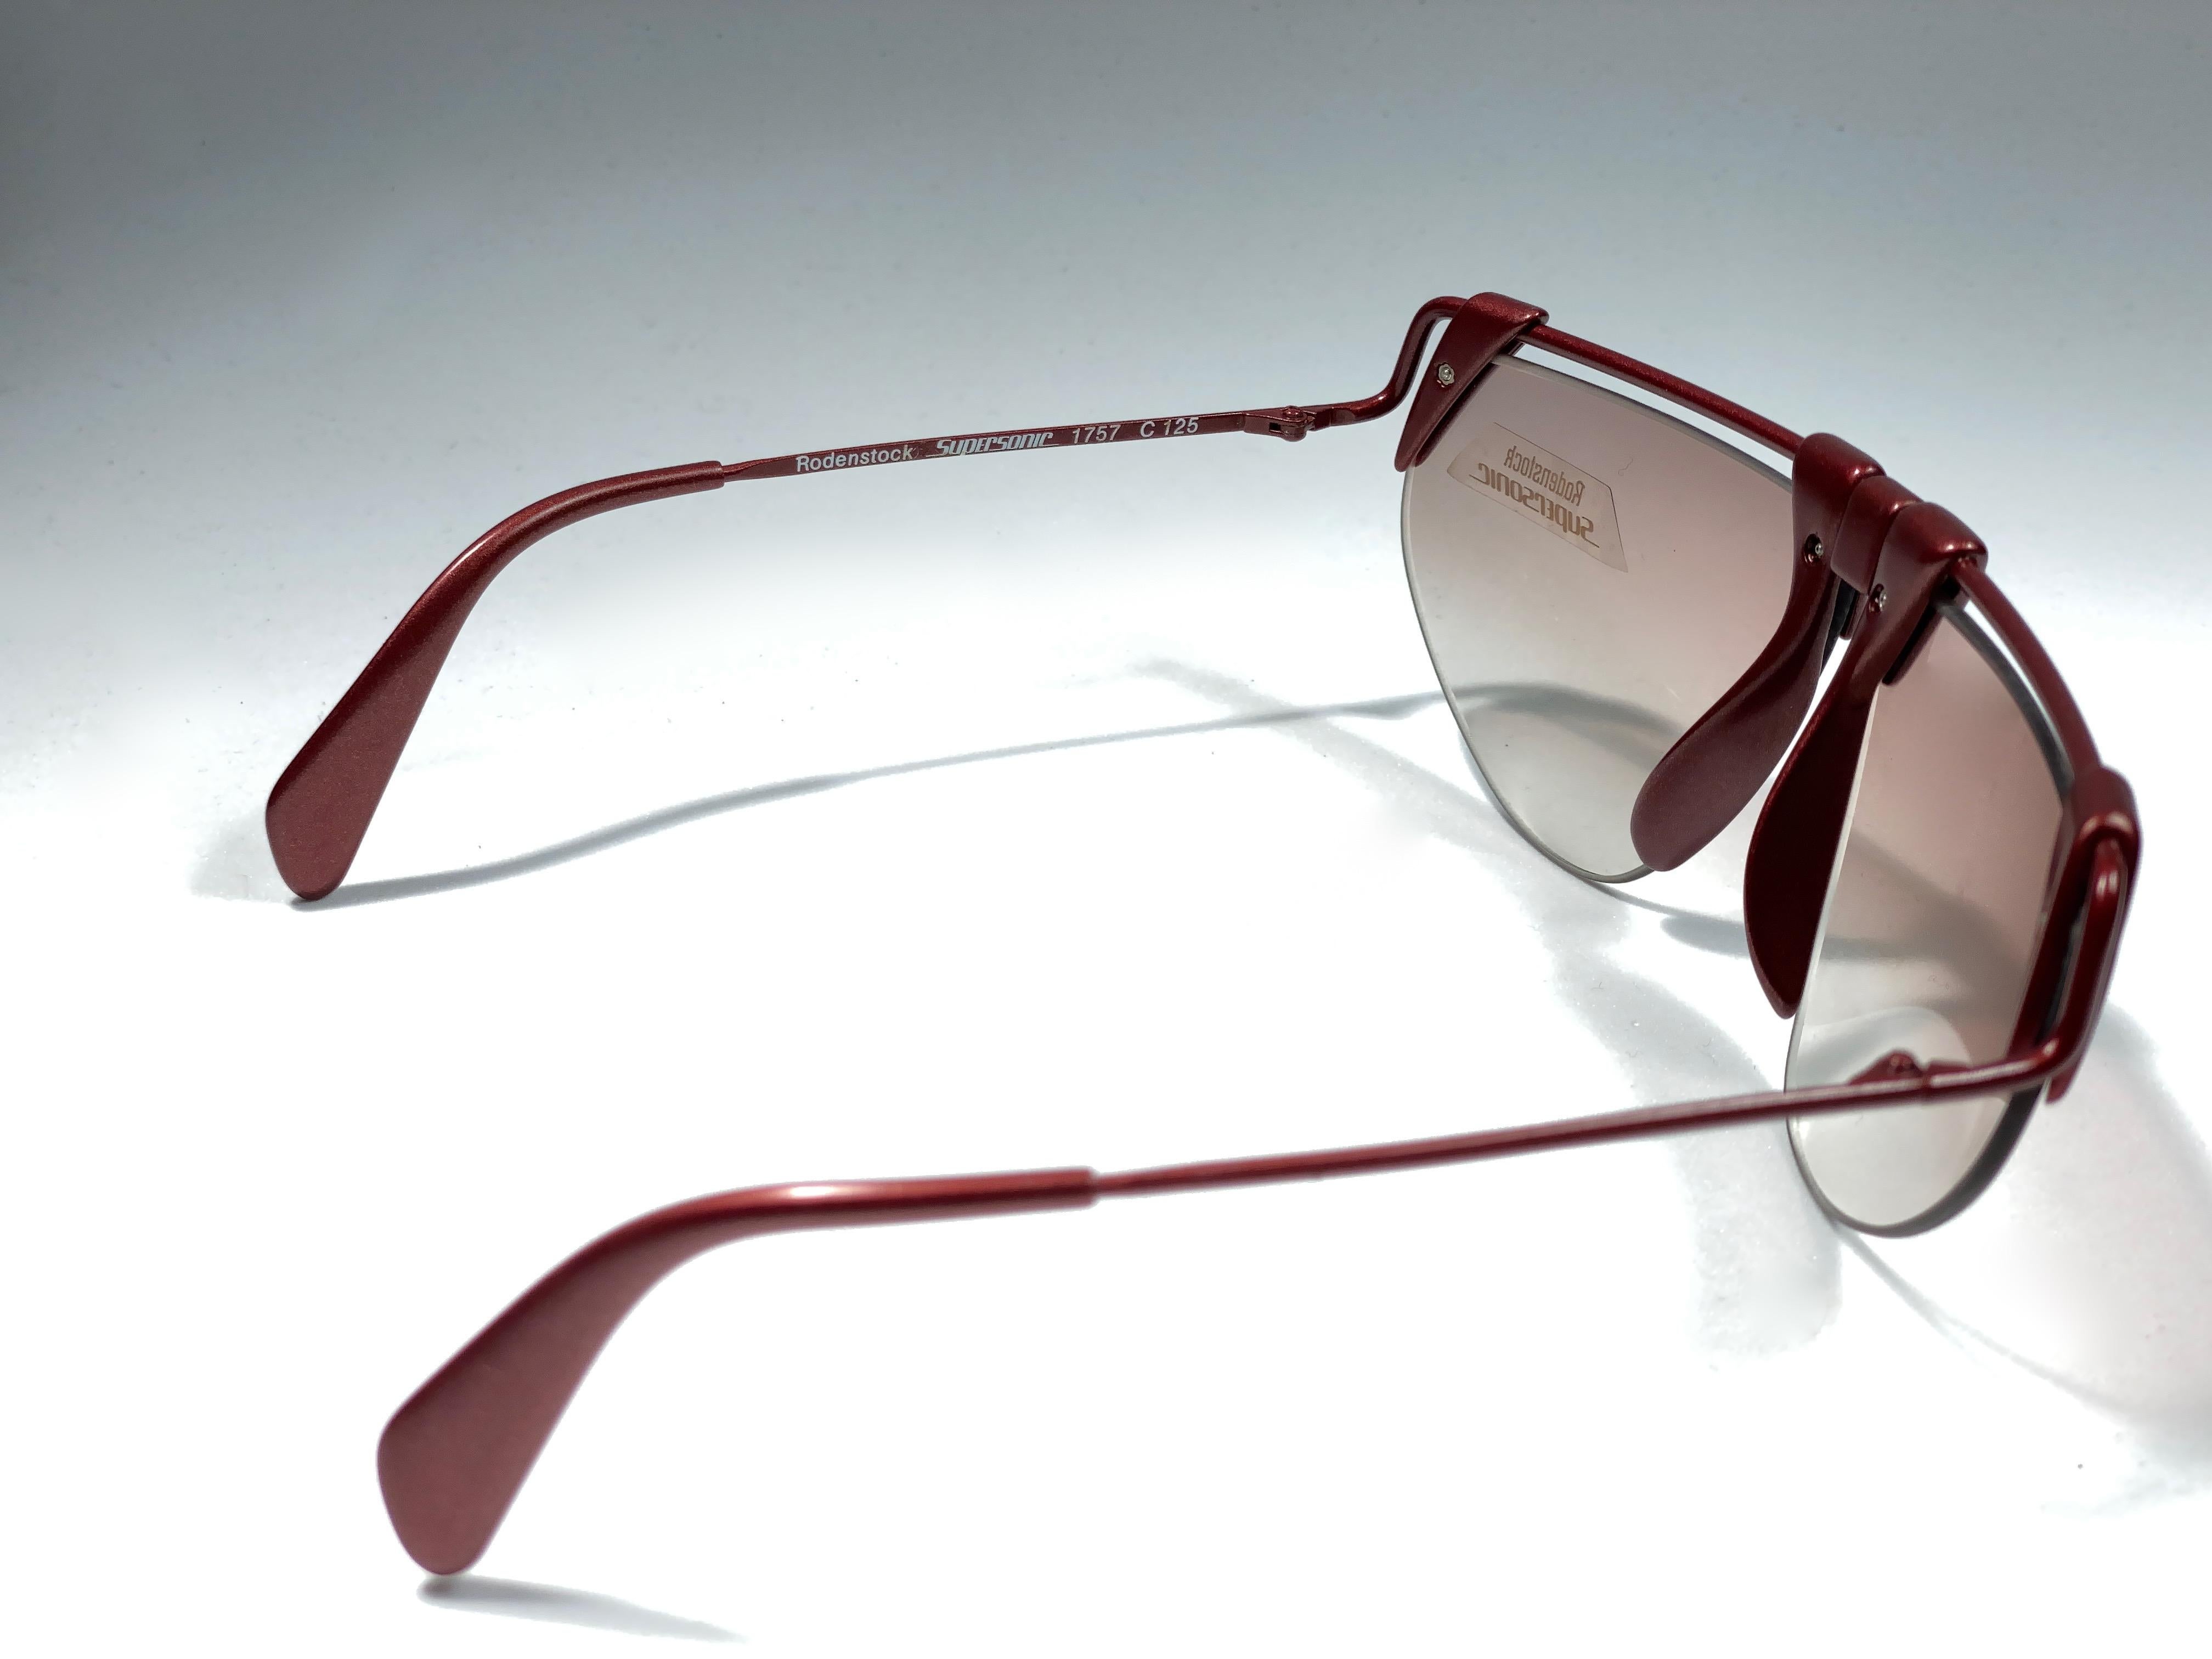 New Vintage Rodenstock 1757 Metallic Burgundy Futuristic 1980's Sunglasses In Excellent Condition For Sale In Baleares, Baleares